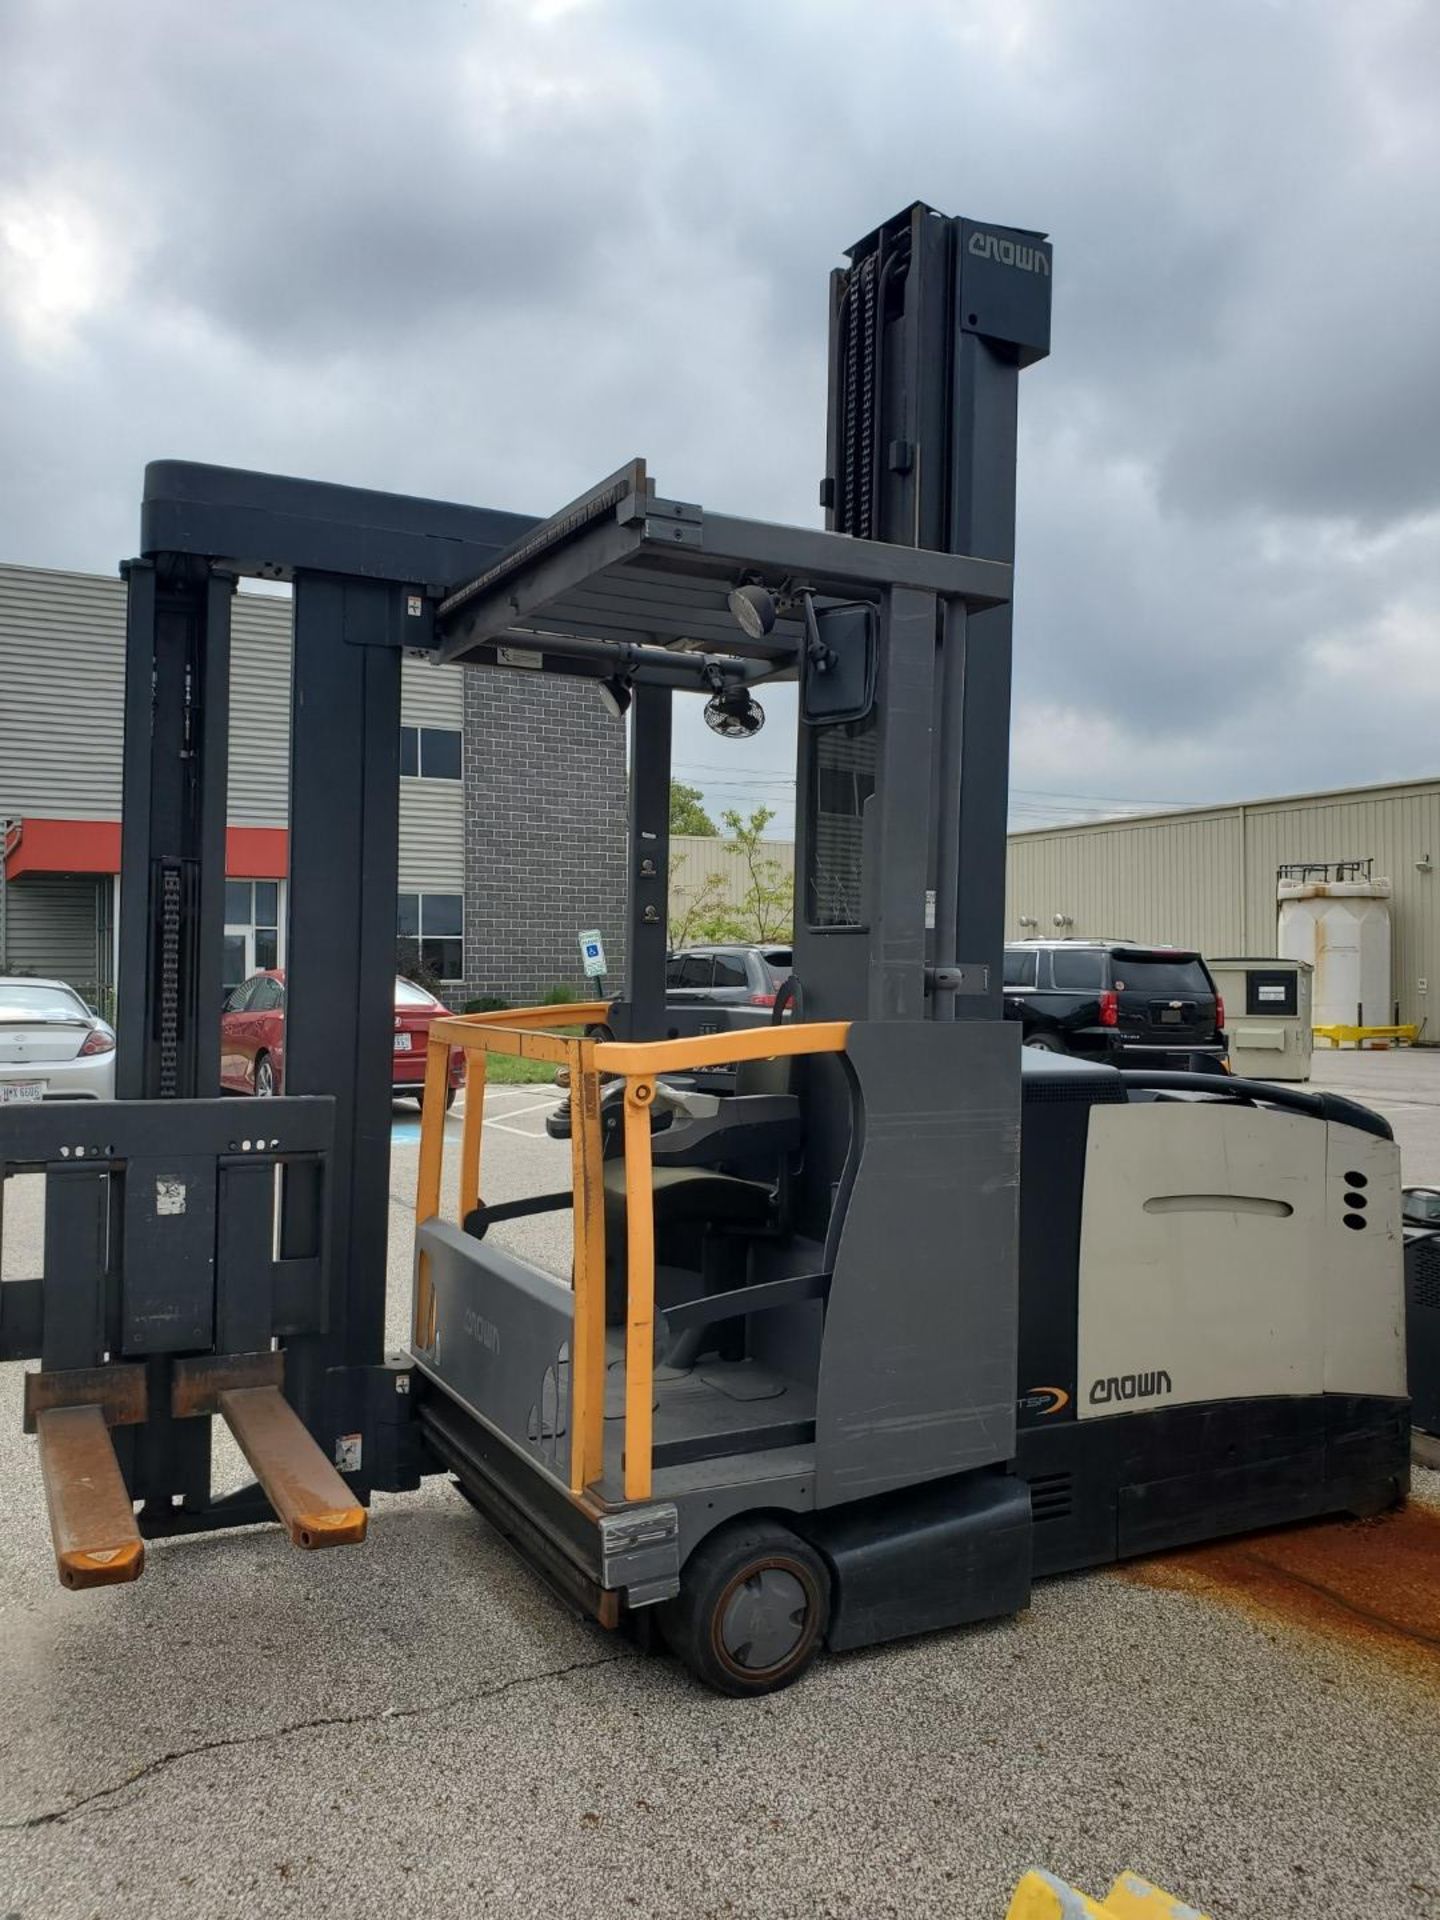 Crown TSP 6000 series Turret Stock Picker / Lift Truck - Image 3 of 7